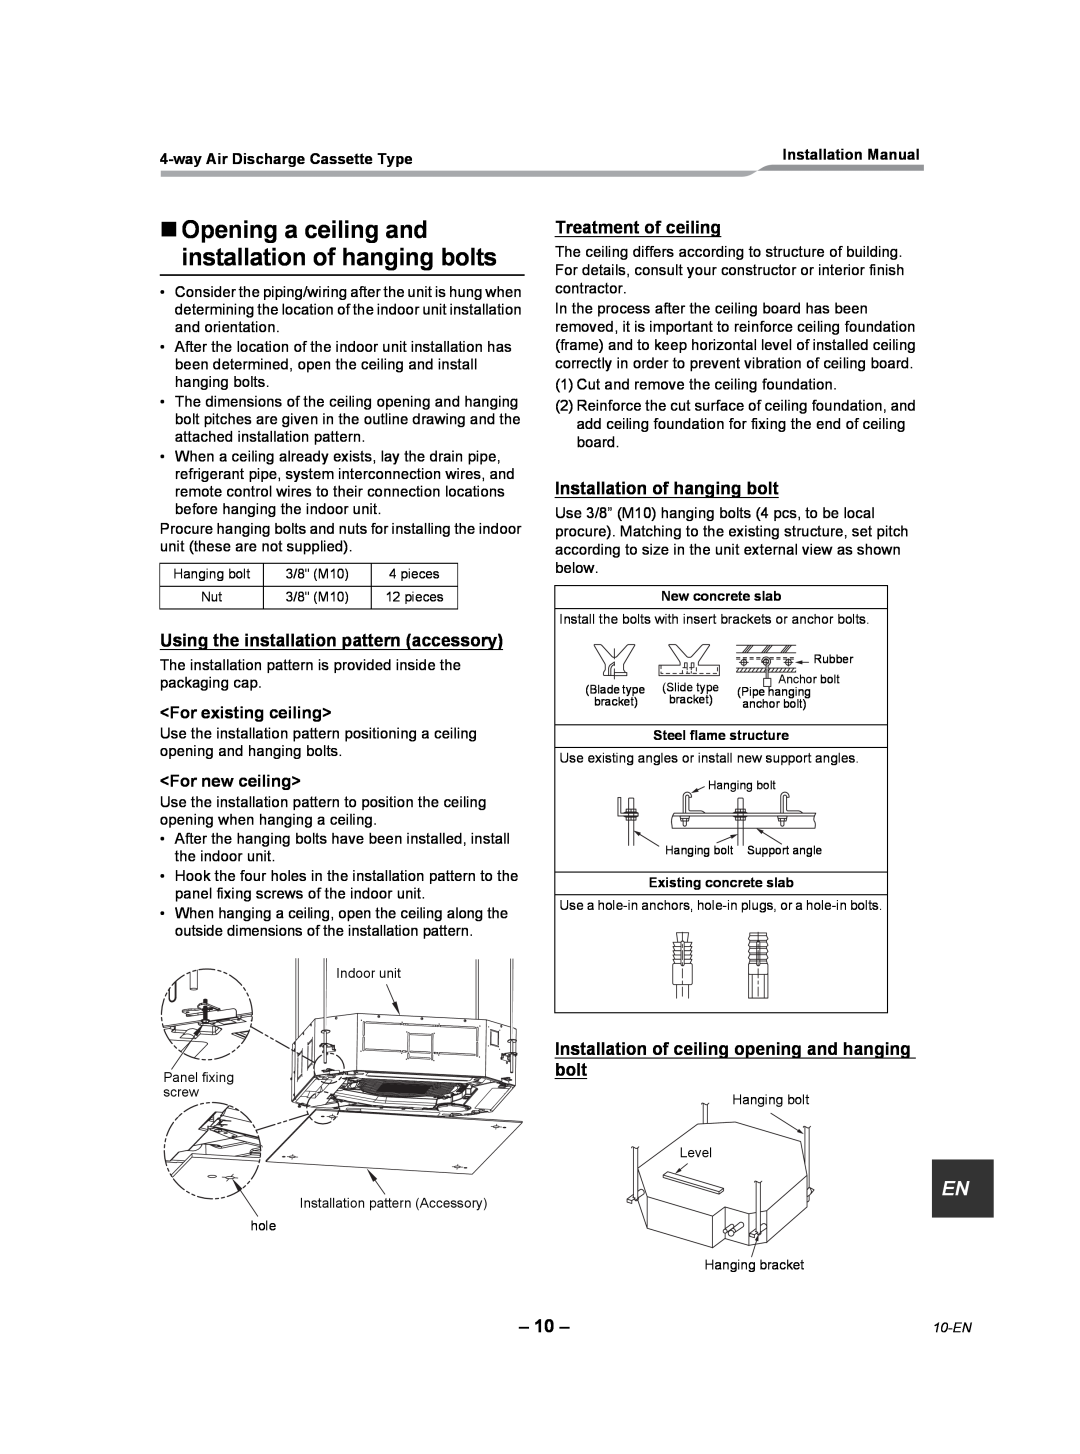 Toshiba RAV-SP180UT-UL installation manual Using the installation pattern accessory, For existing ceiling, For new ceiling 